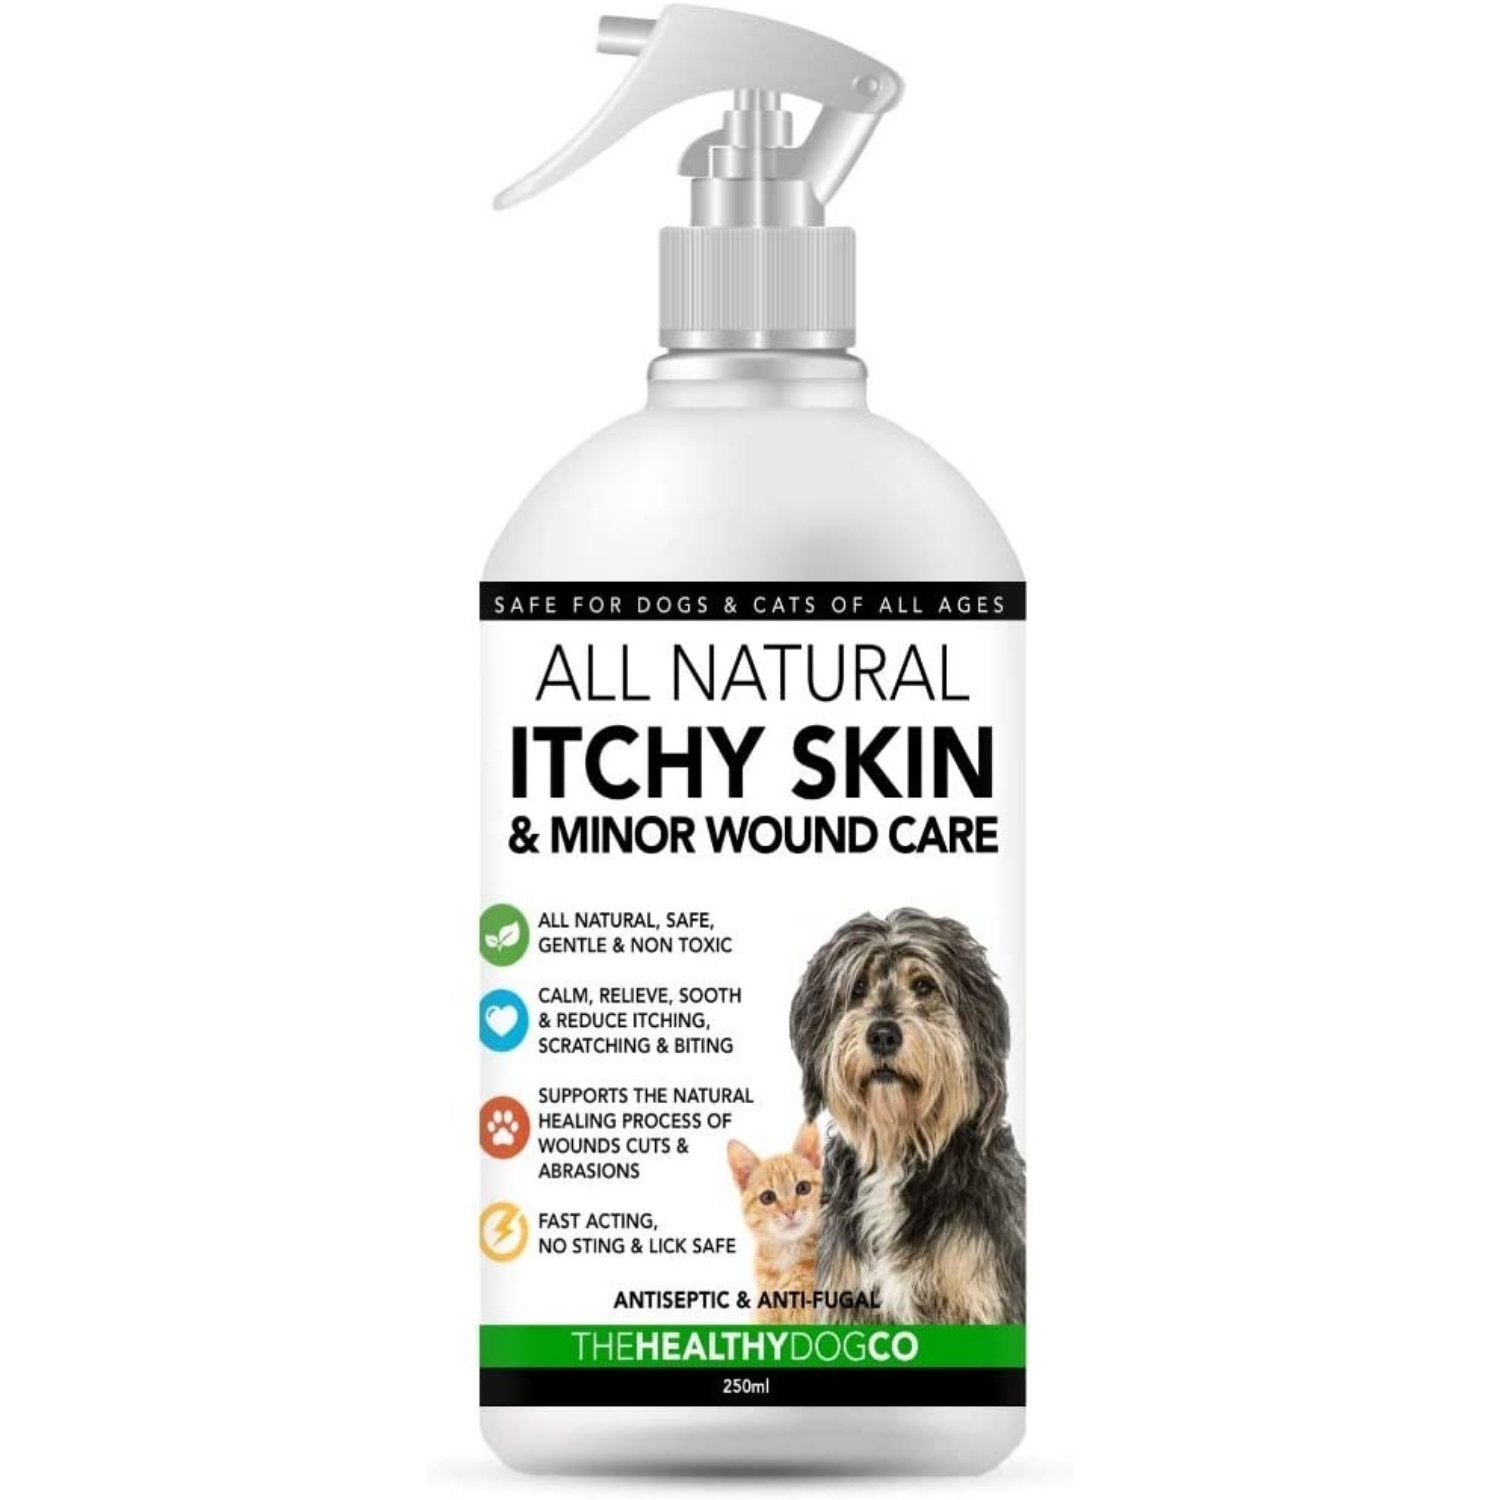 Itchy Skin & Wound Care For Dogs & Cats - The Healthy Dog Co